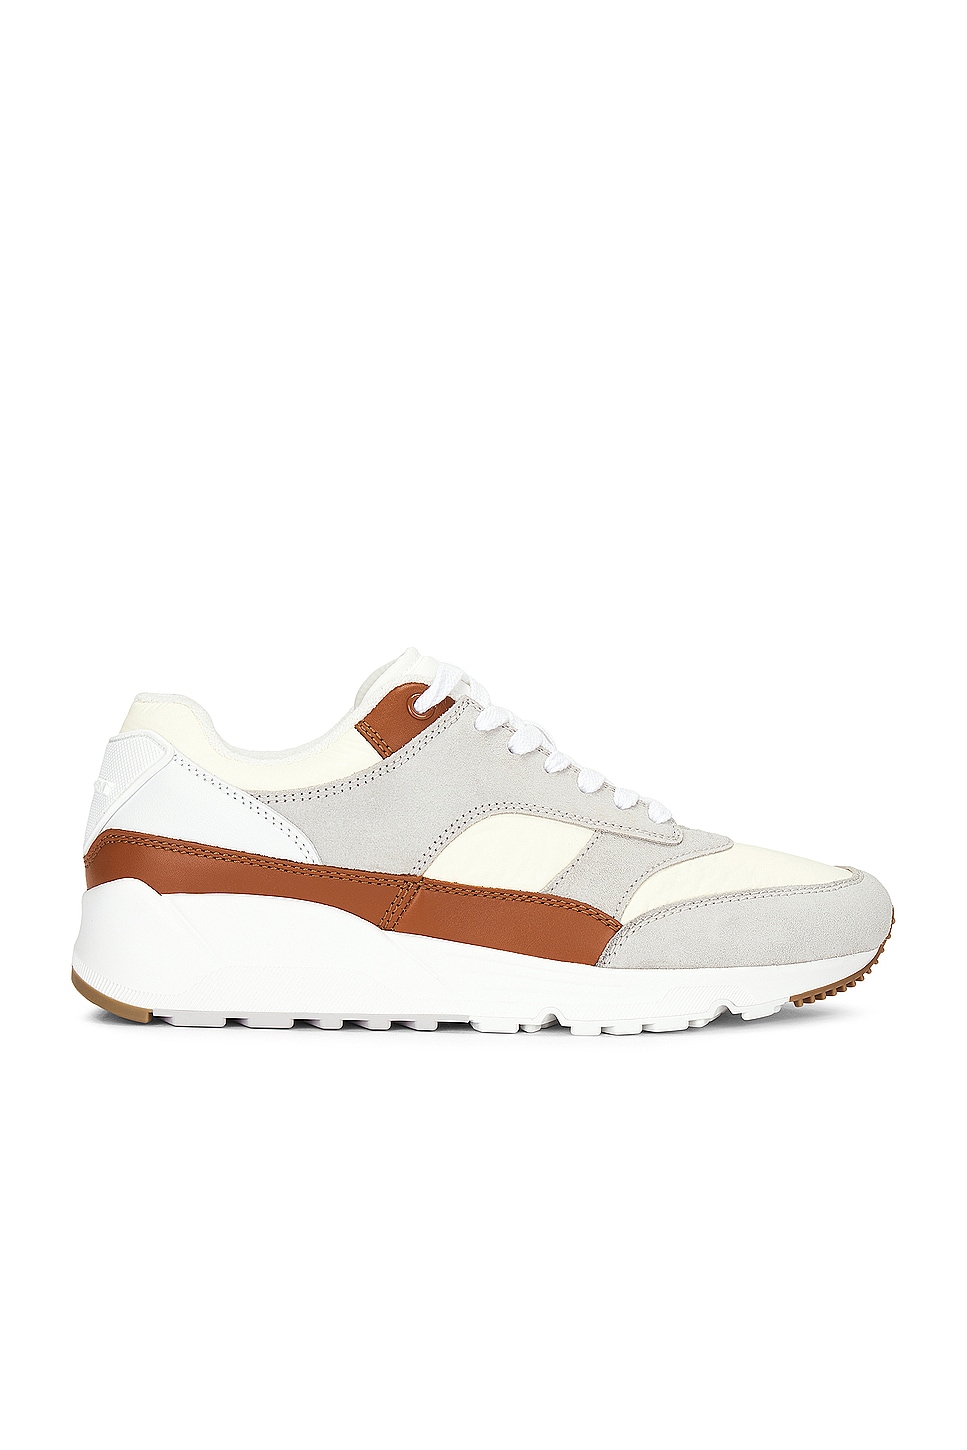 Image 1 of Saint Laurent Bump Low Top Sneaker in Gris, Cuoio, Off White, & Blanc